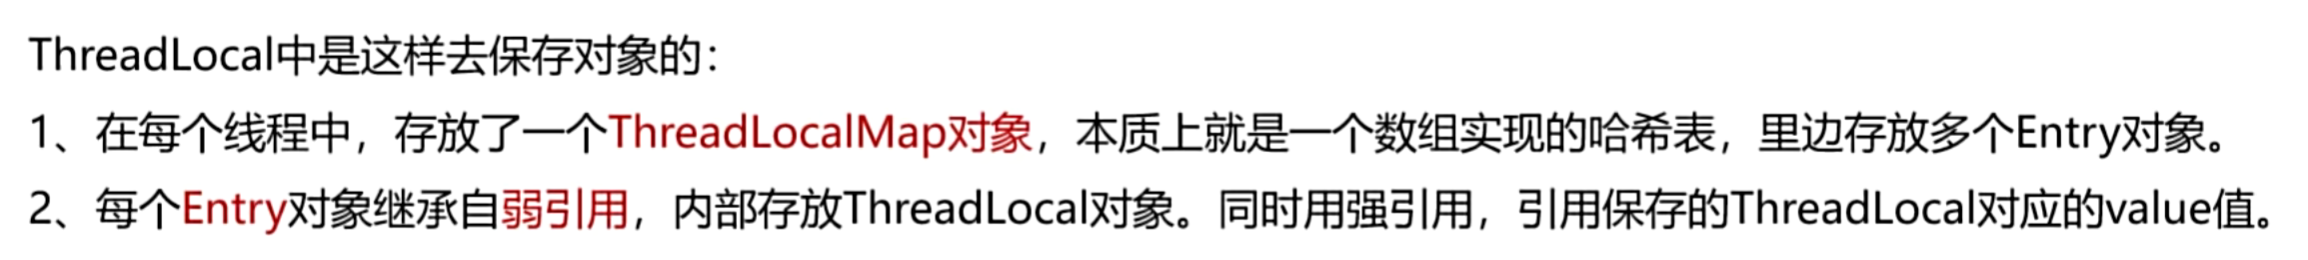 ThreadLocal<span style='color:red;'>中</span><span style='color:red;'>为什么</span>使用弱<span style='color:red;'>引用</span>